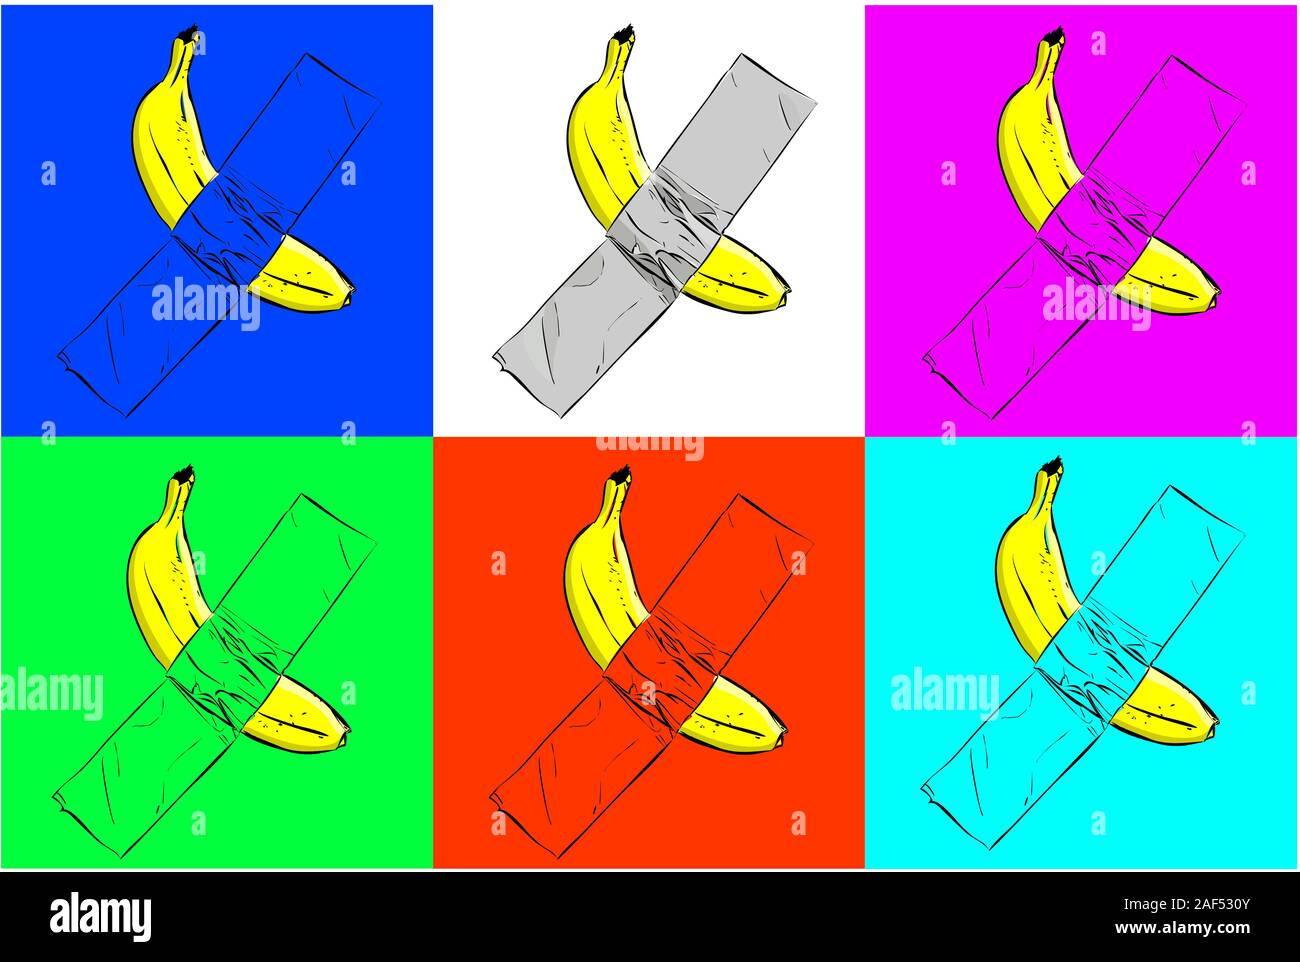 Banana duct taped to a wall. Pop art style poster. Stock Photo